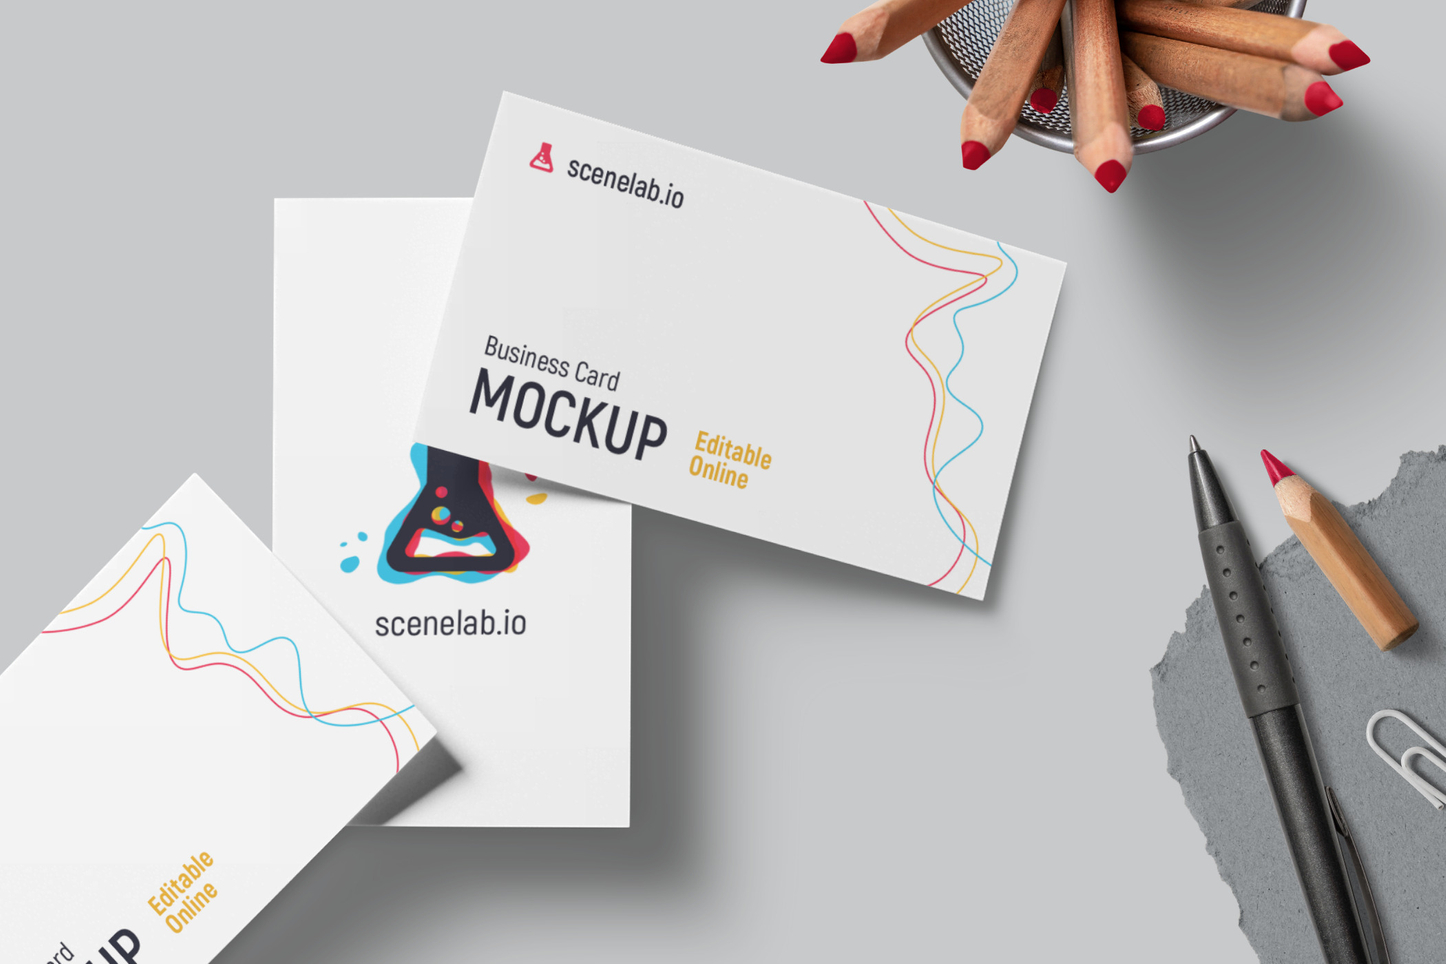 Download 5 Free Business Card Mockups Without Photoshop | SceneLab ...